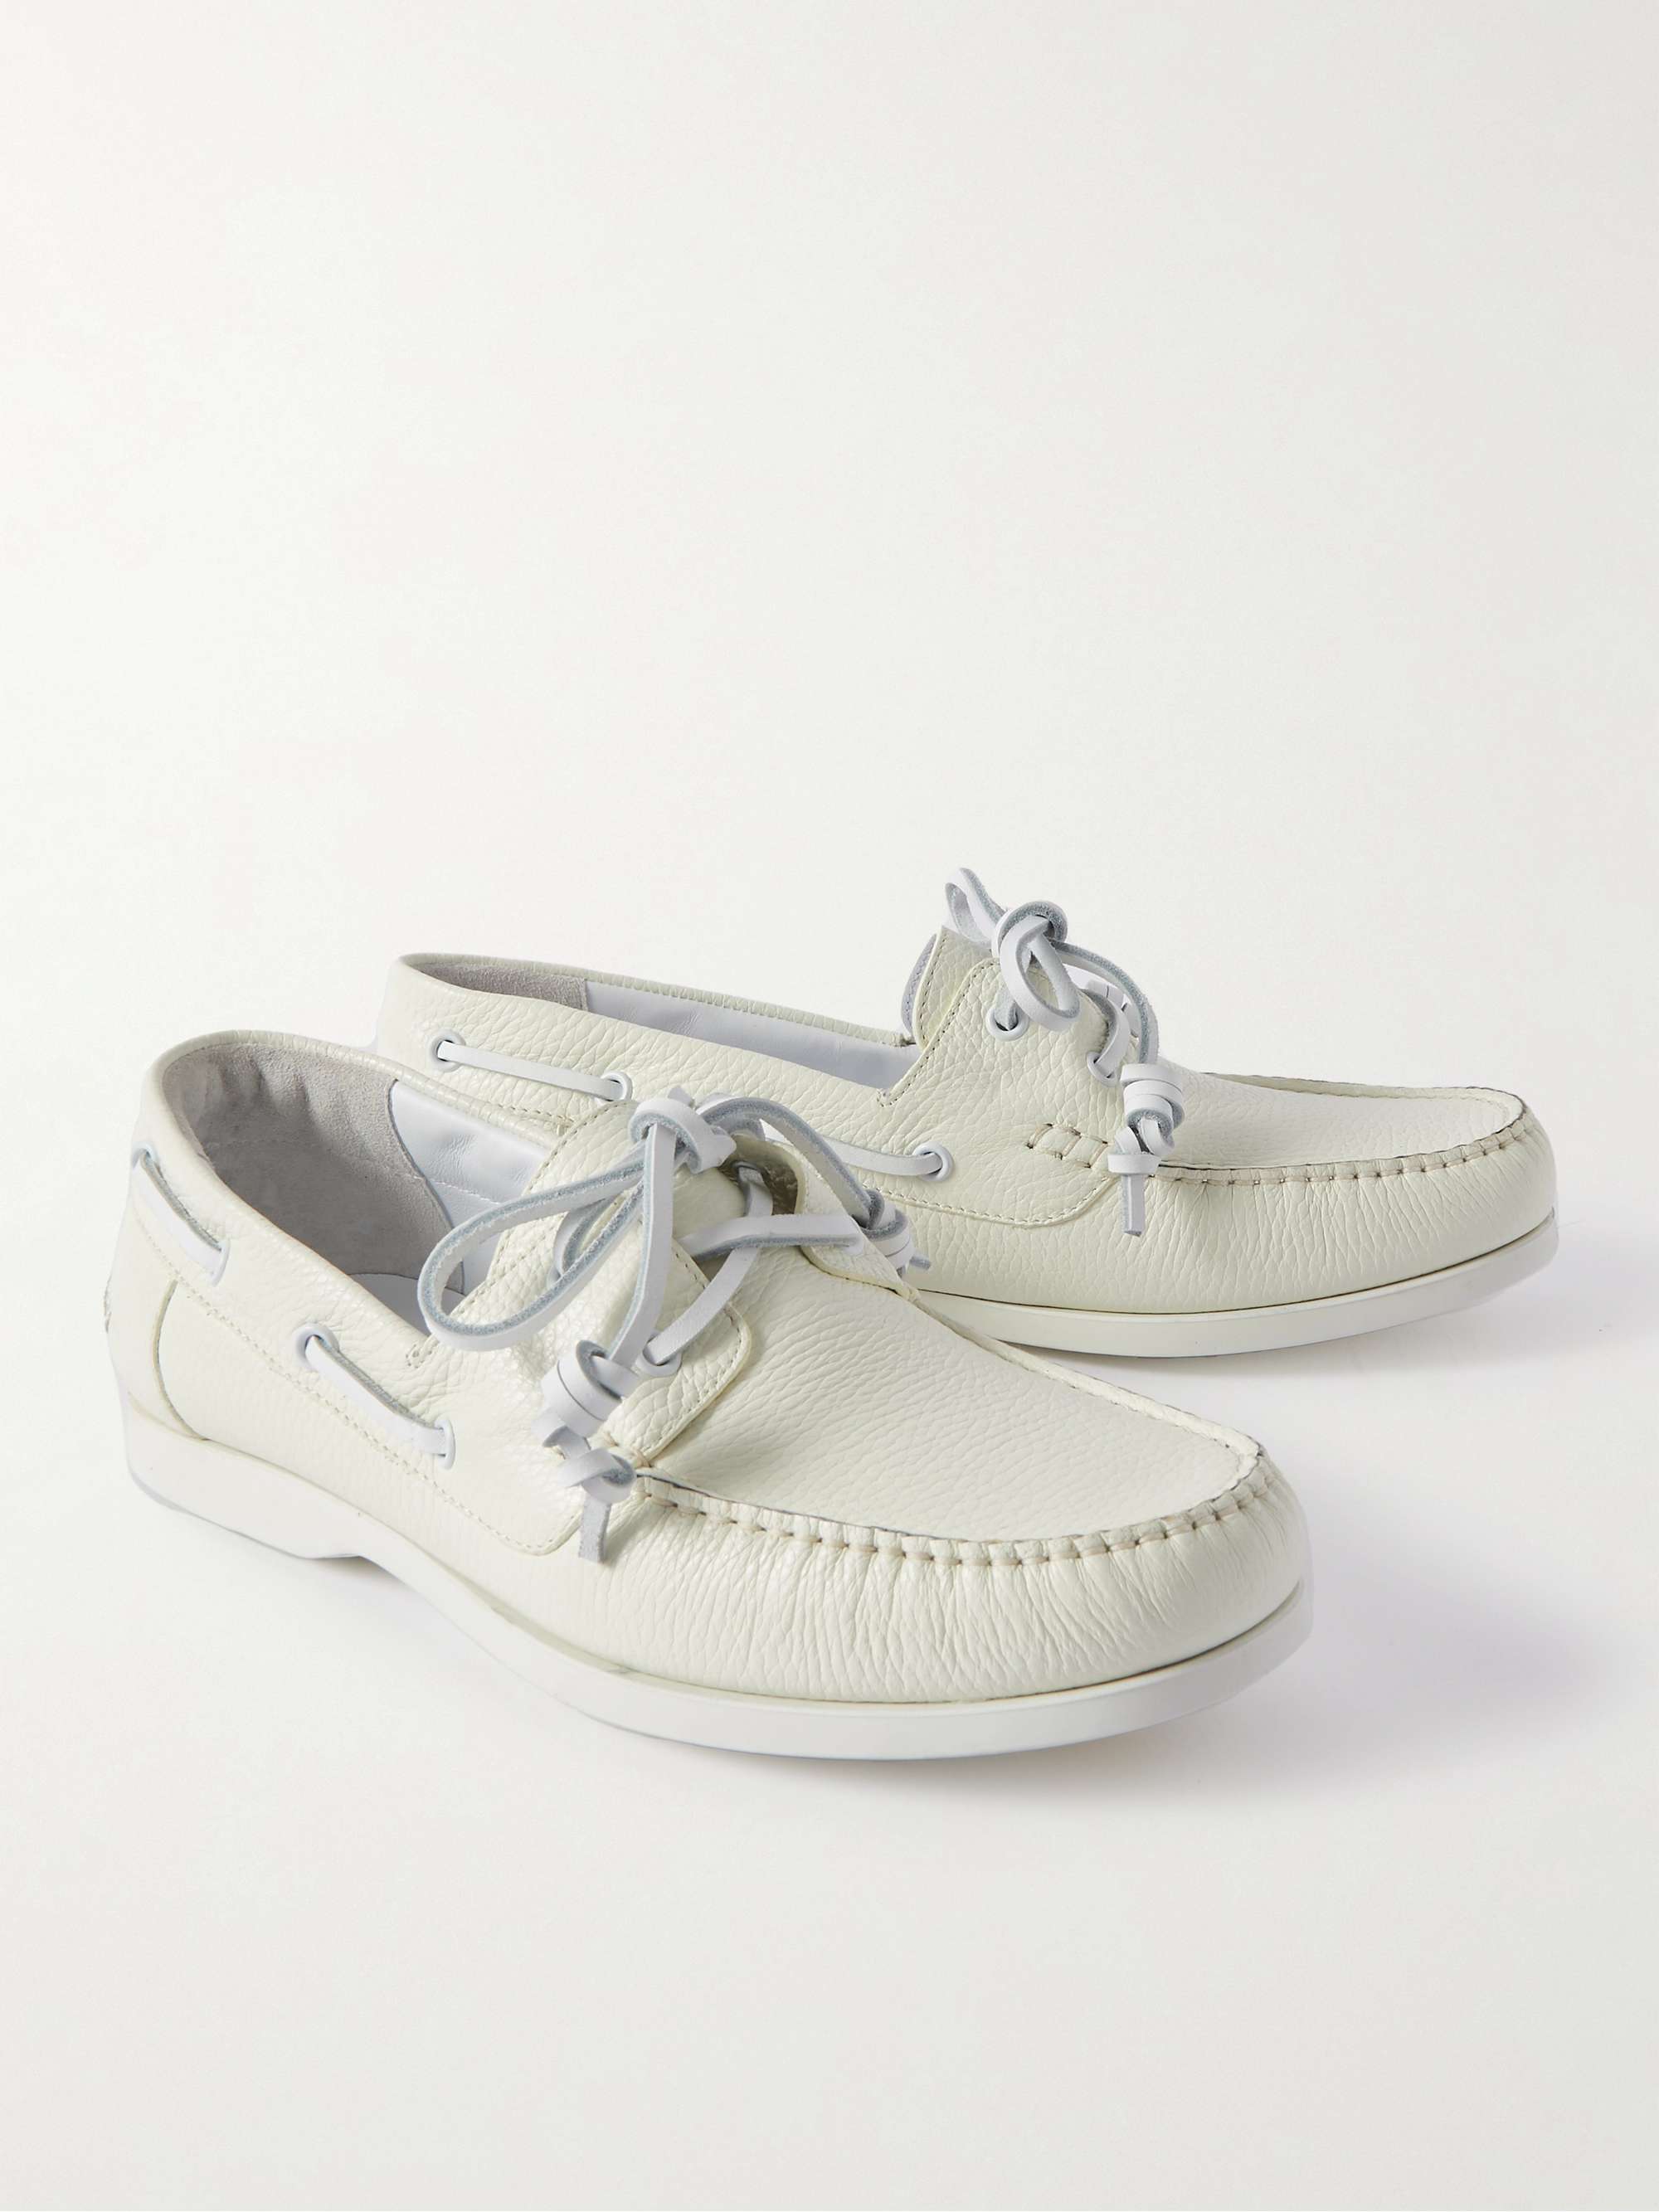 MANOLO BLAHNIK Sidmouth Full-Grain Leather Boat Shoes